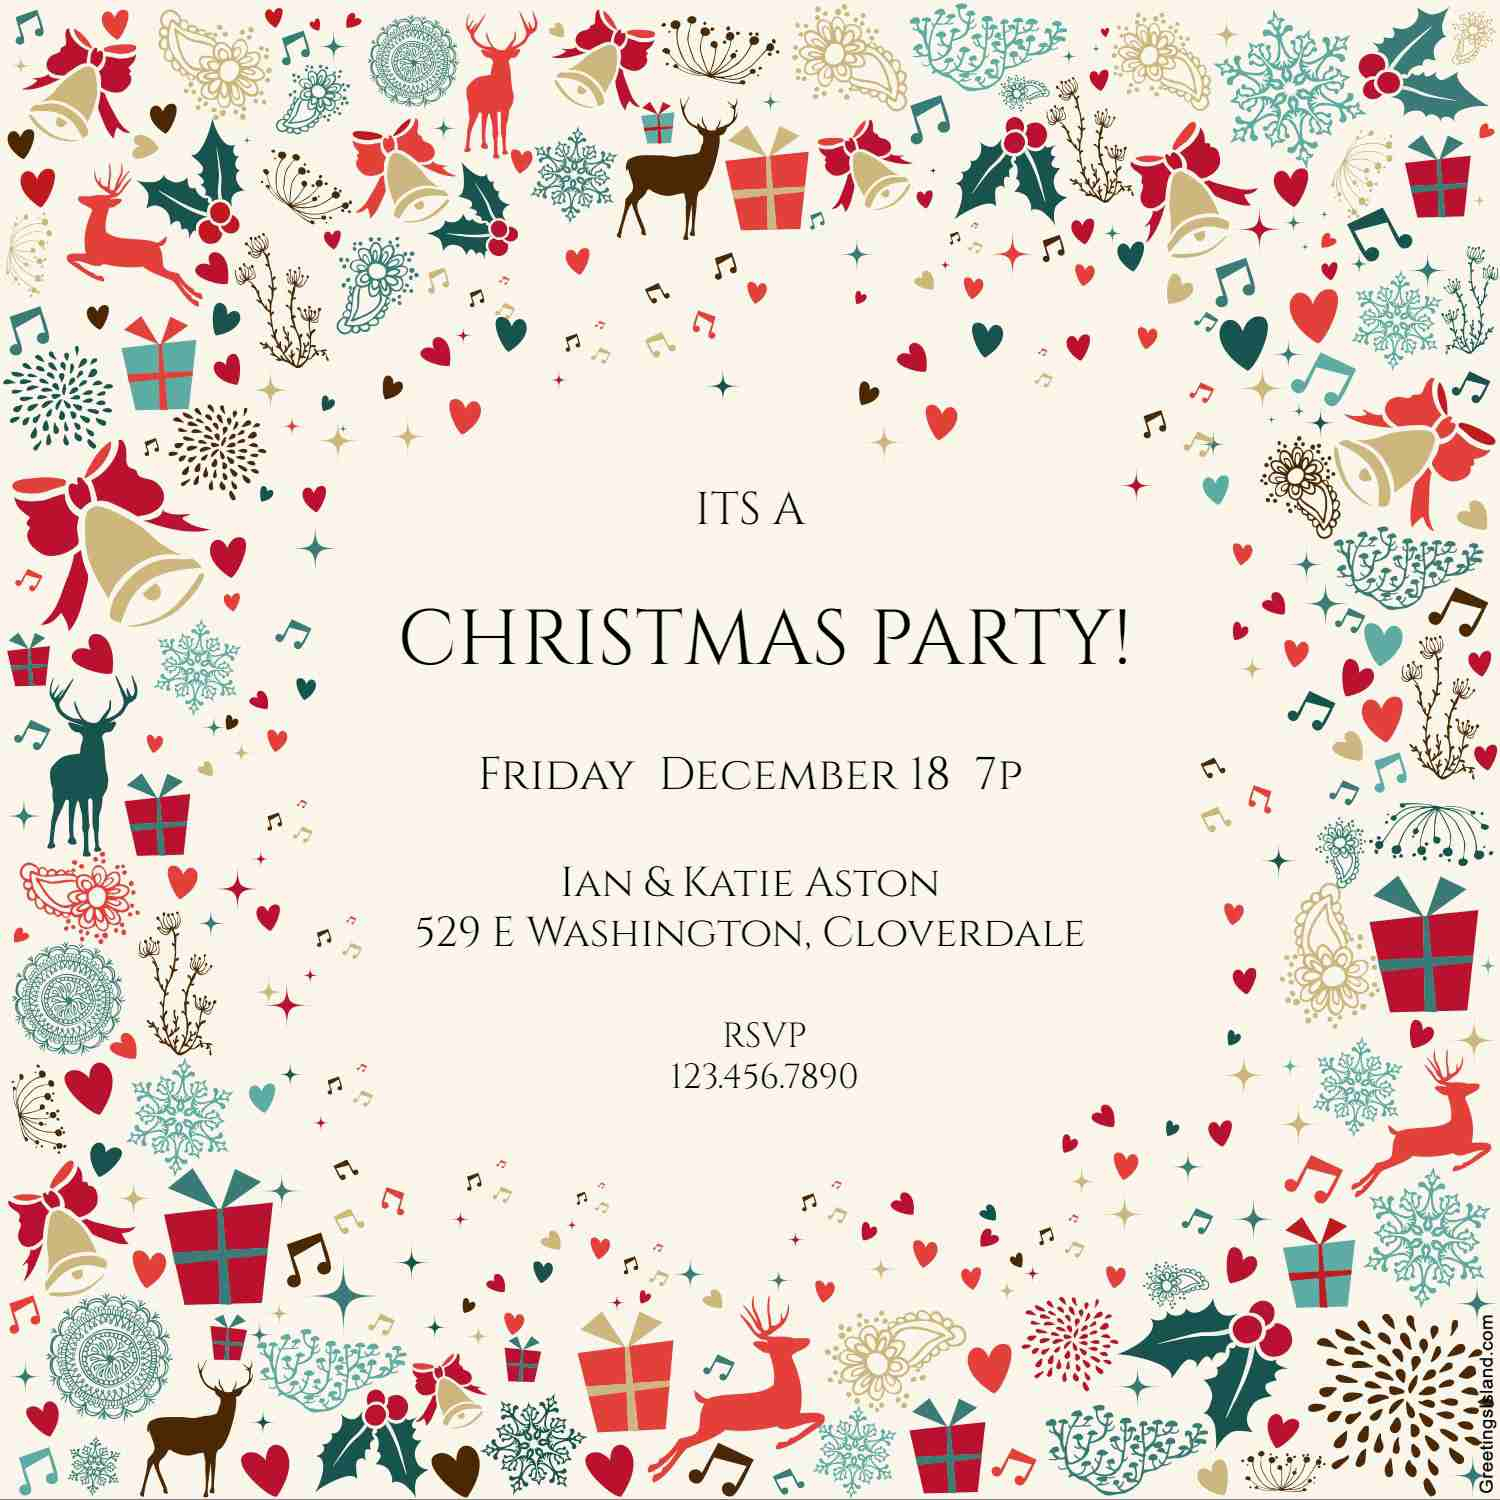 10 Free Christmas Party Invitations That You Can Print - Free Printable Christmas Party Signs